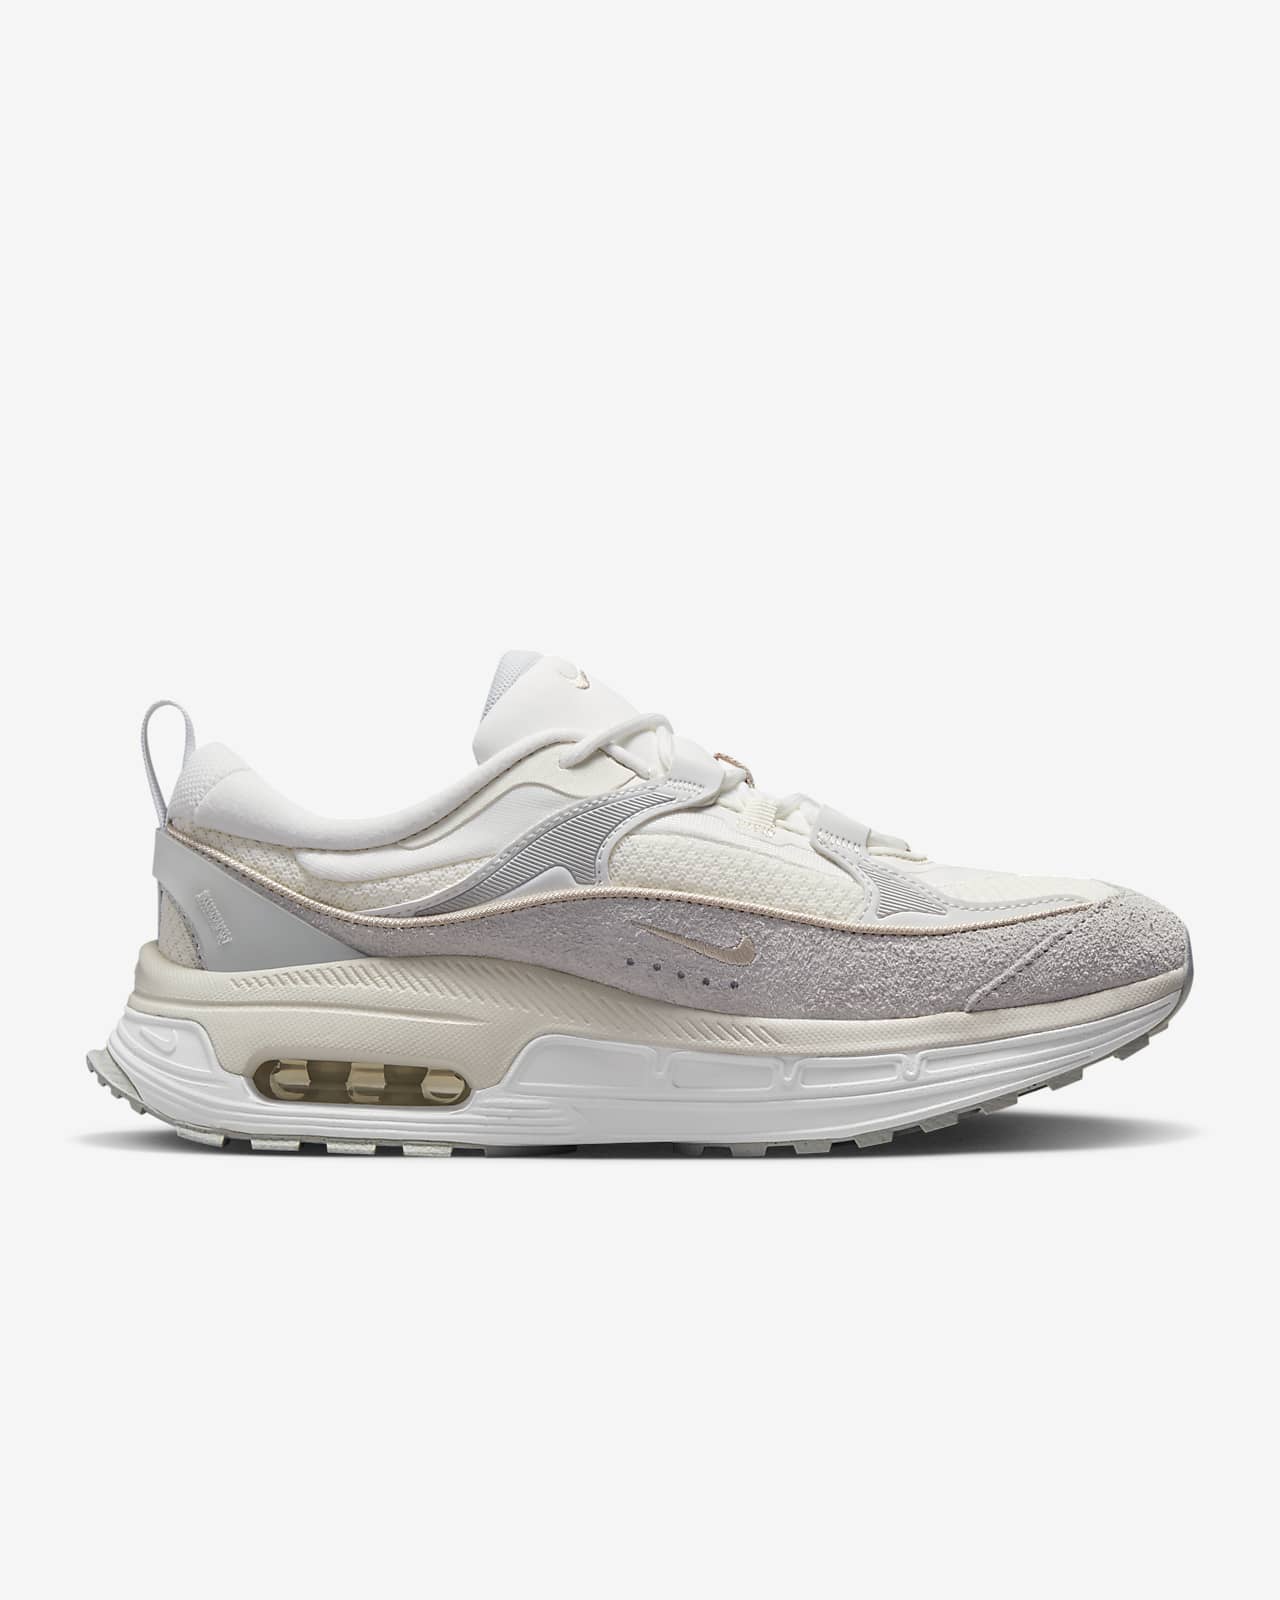 Nike Air Max Bliss LX Women's Shoes